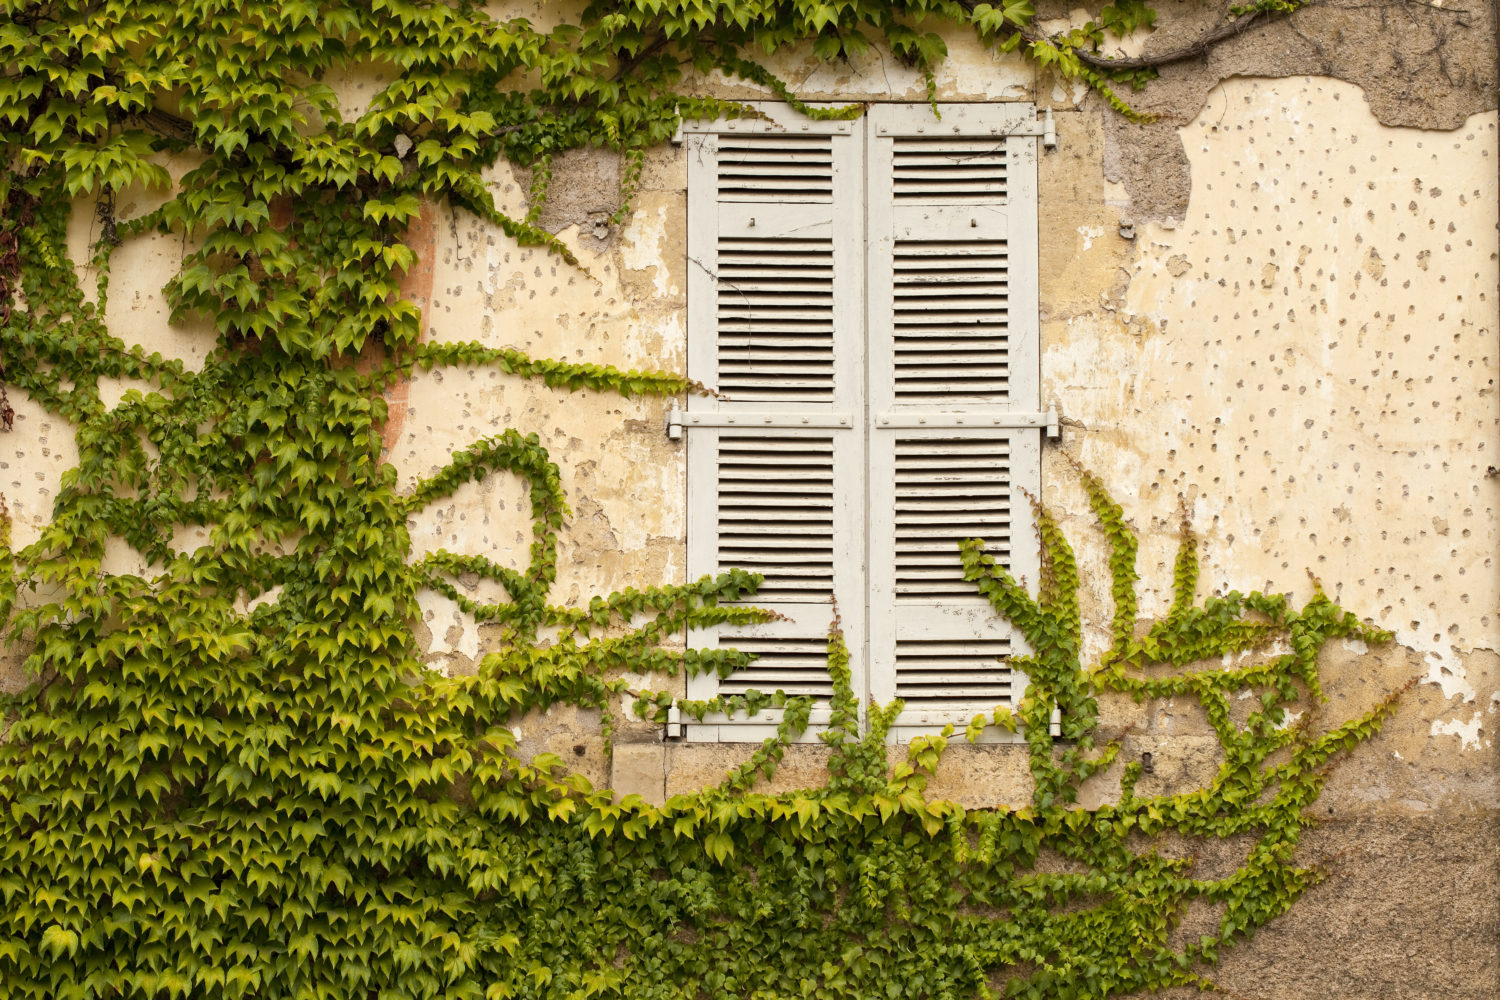 Closed French Window with Ivy. Ivy is encroaching on the shutters of this traditional French window.